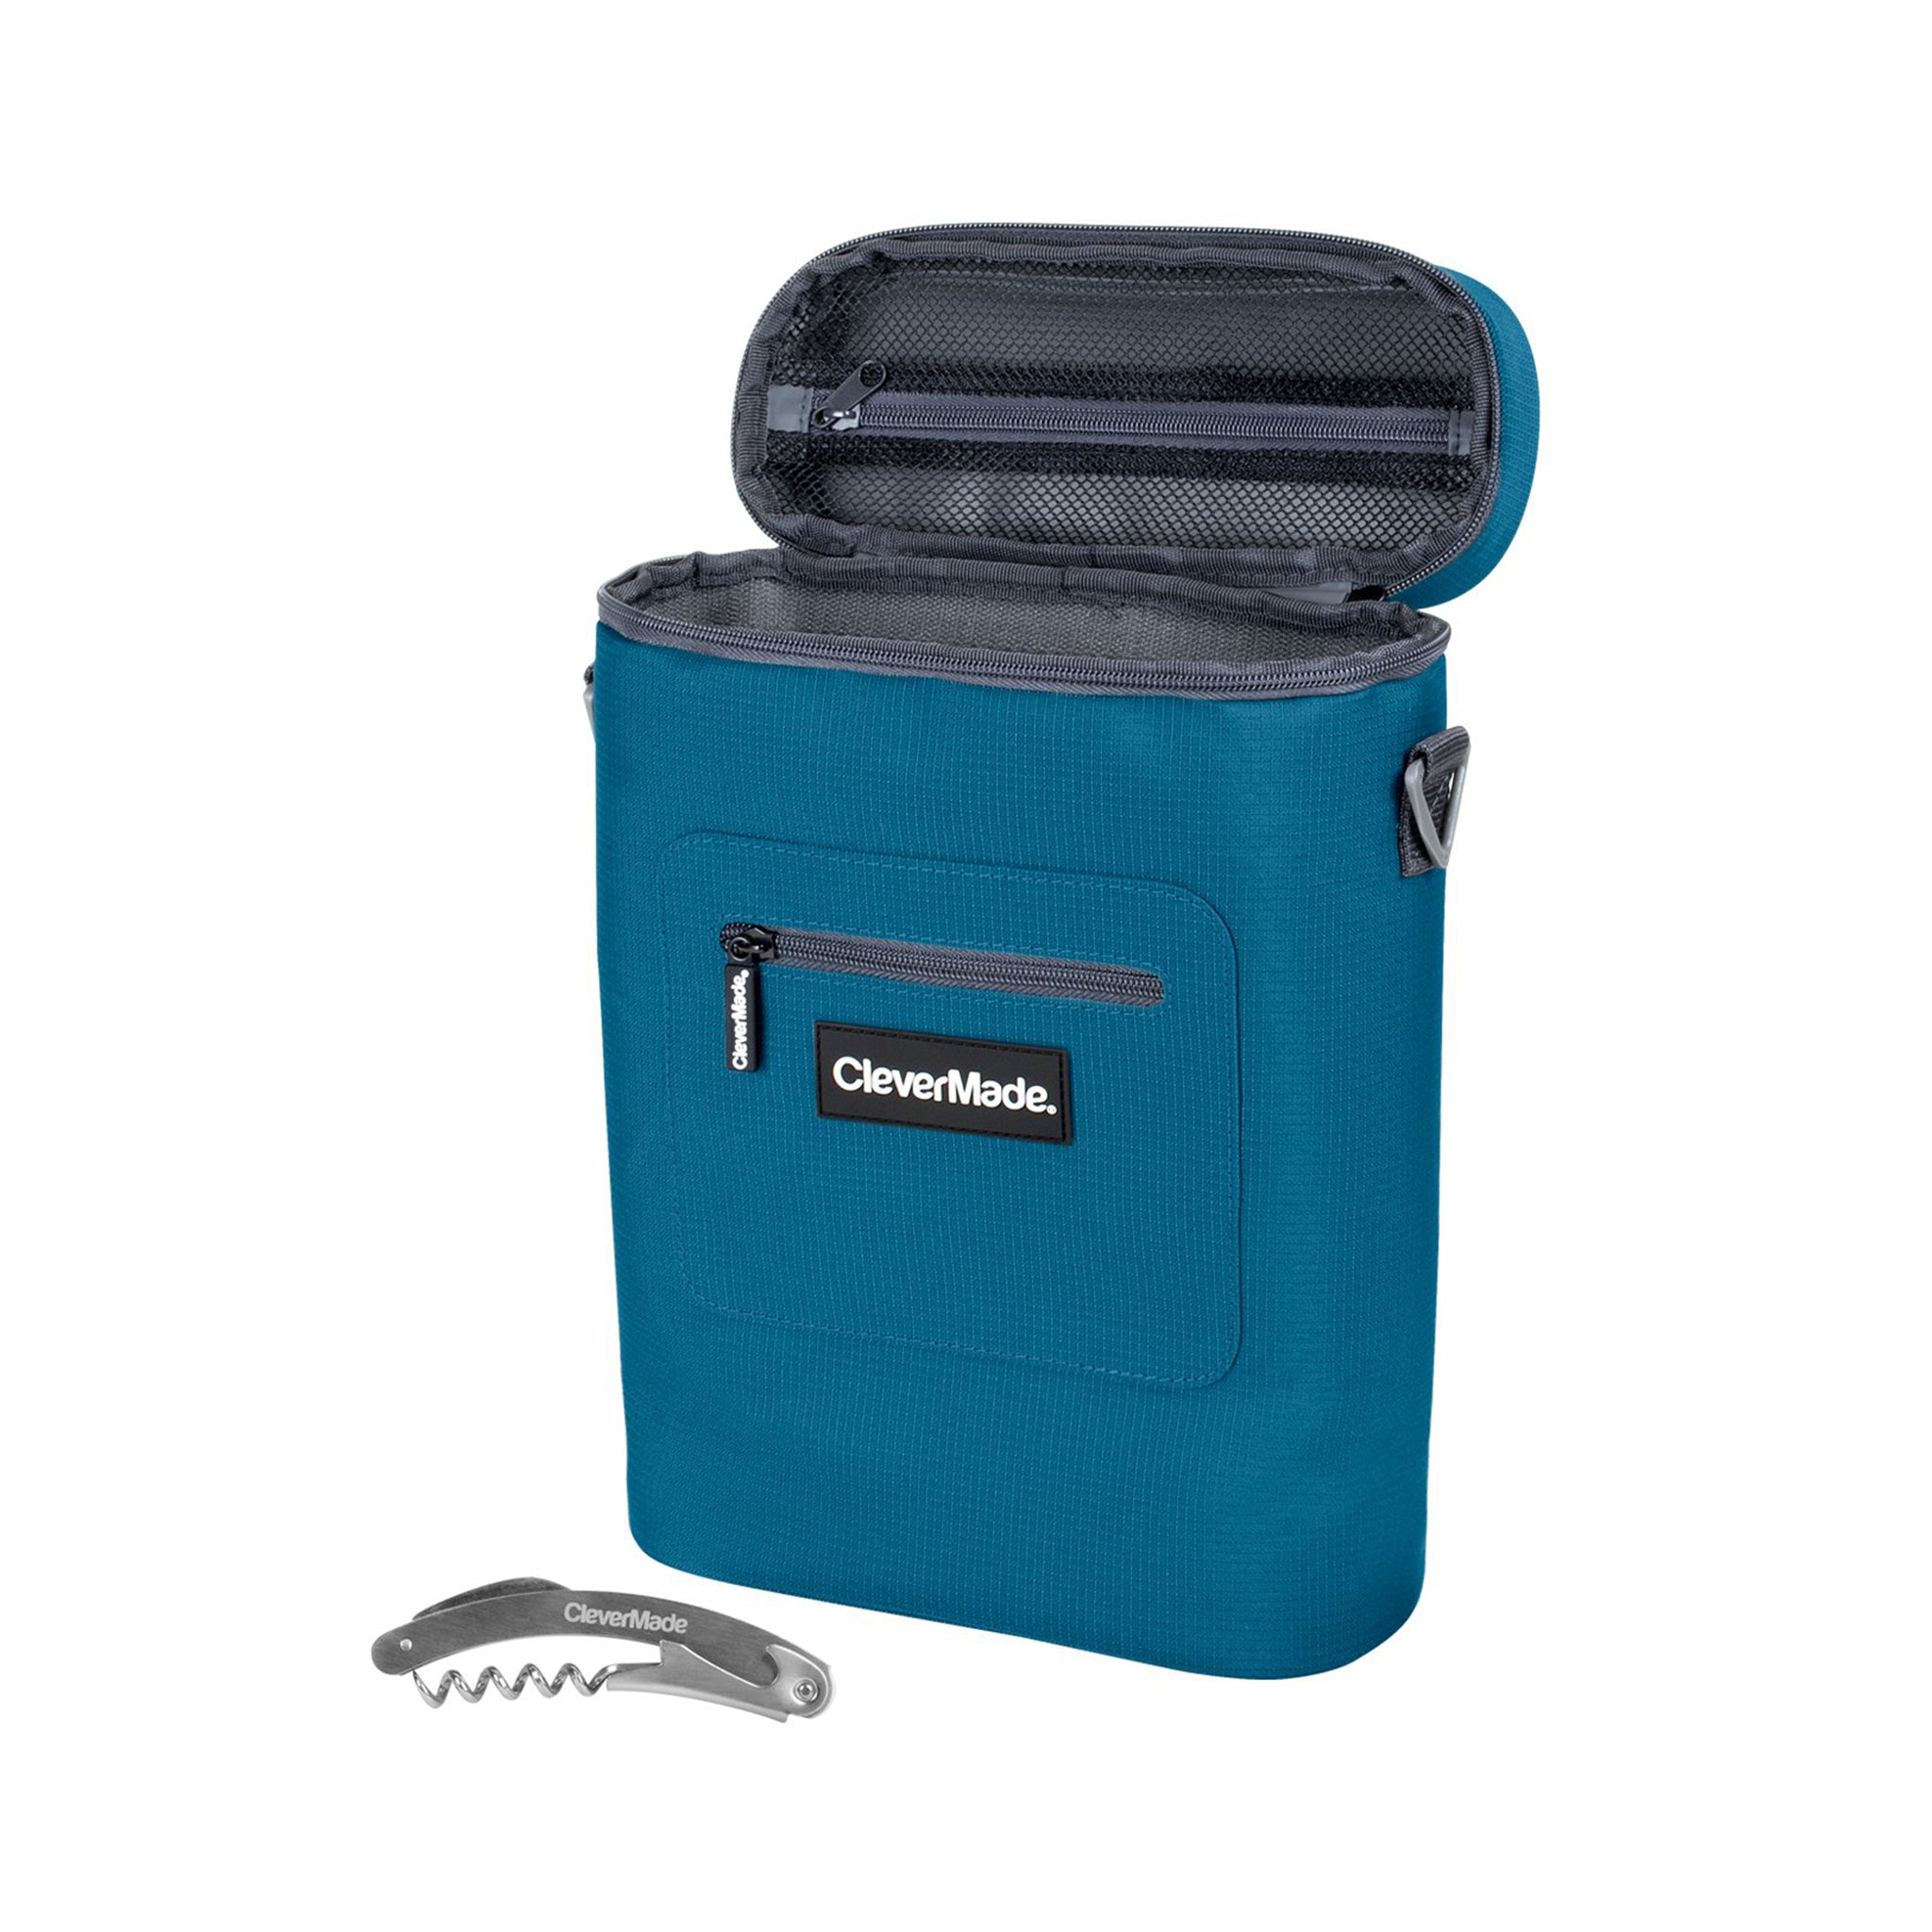 AROUY Golf Cooler Bag - Small Soft Cooler Holds A 6 Pack of Cans or Two Bottles of Wine